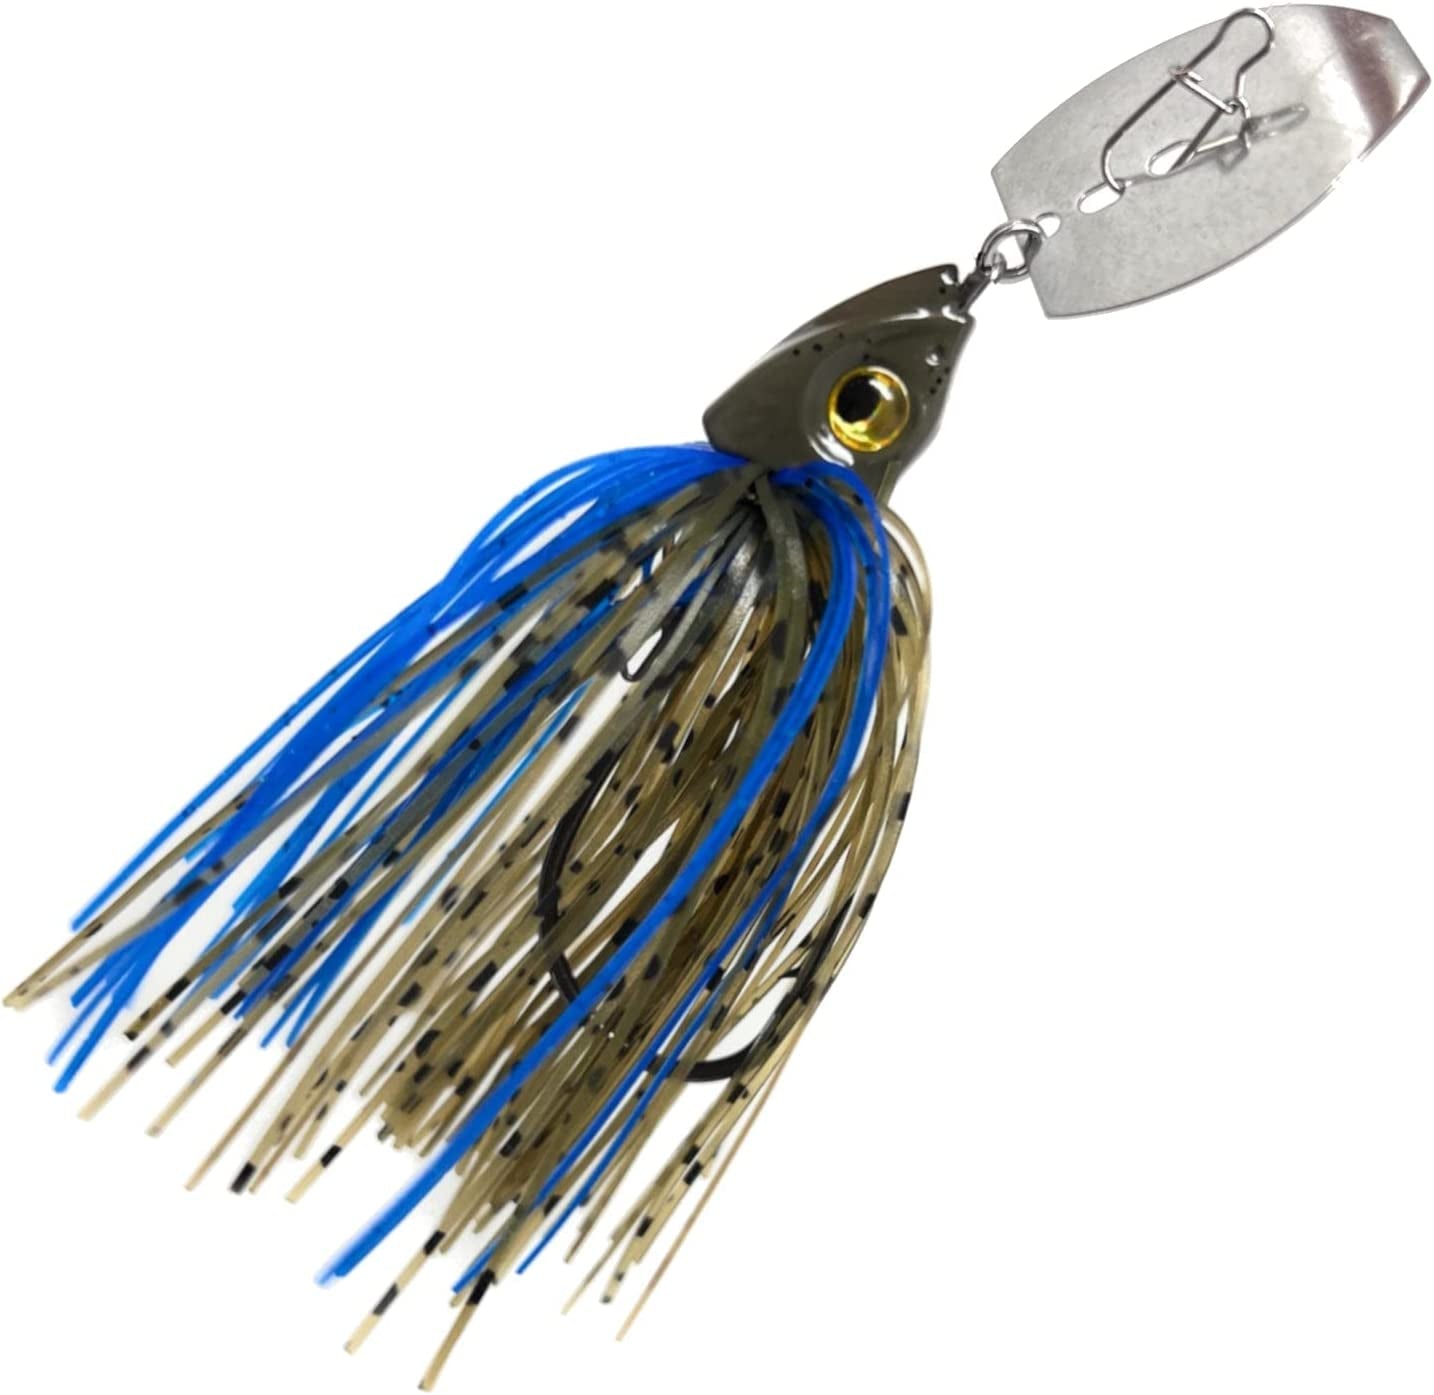 Tungsten Bladed Swim Jig Heads for Fishing - 2 Pack of Fishing Jigs for Large and Smallmouth Bass, Trout, Walleye - with Bladed Head to Make a Chatter Sound -Vibrating Spinner Bait